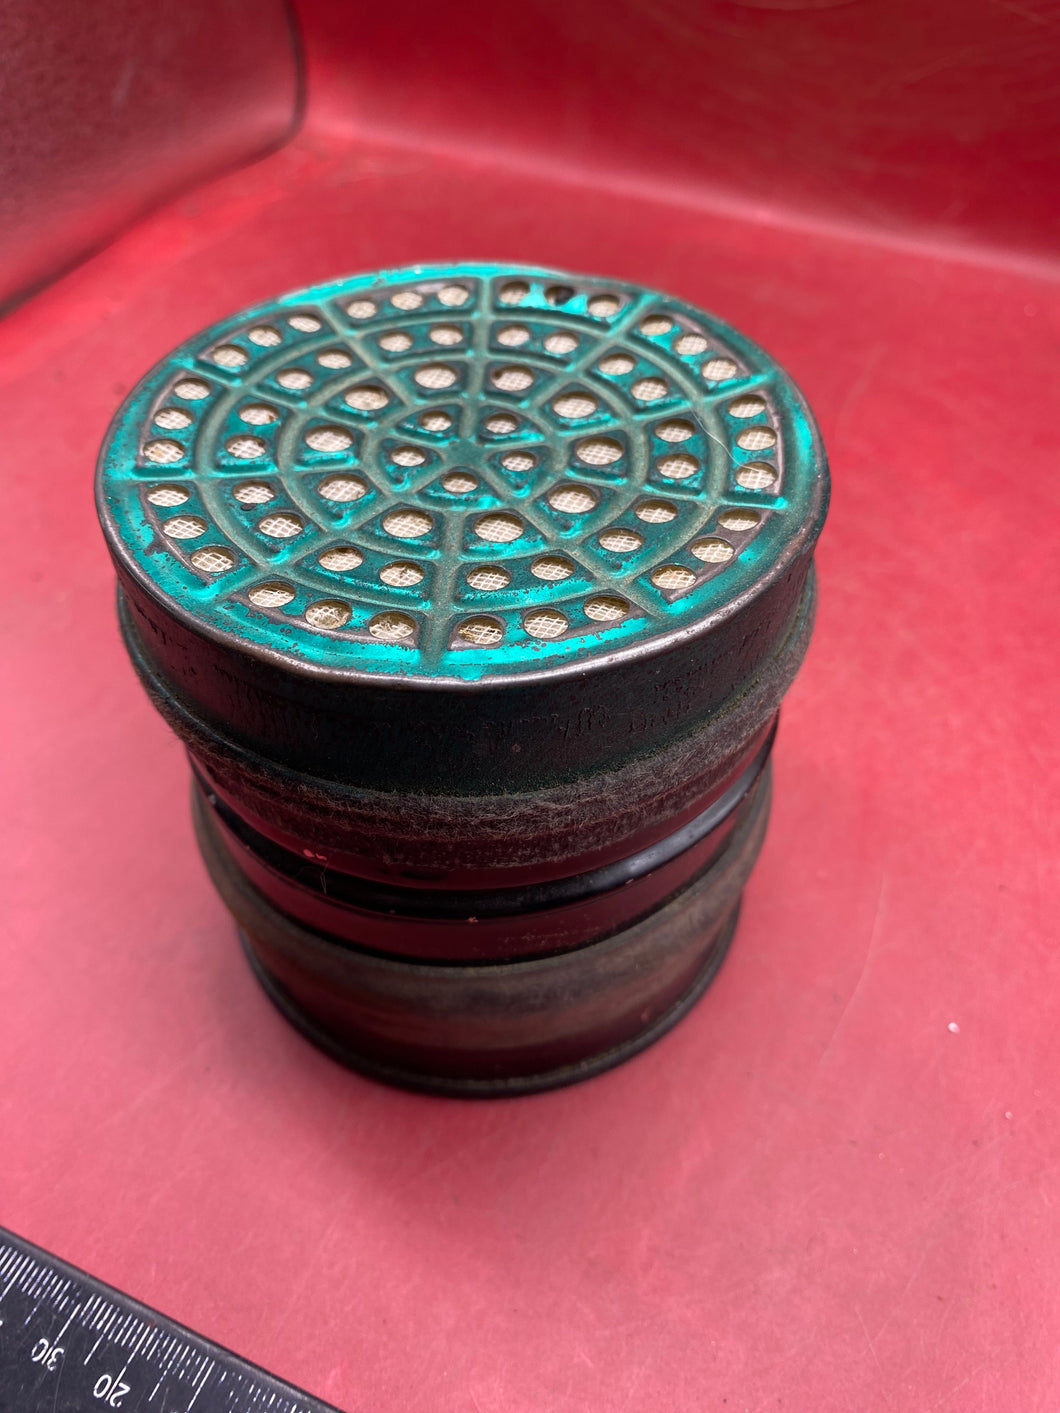 1937 dated British Civilian Gas Mask Filter in good condition